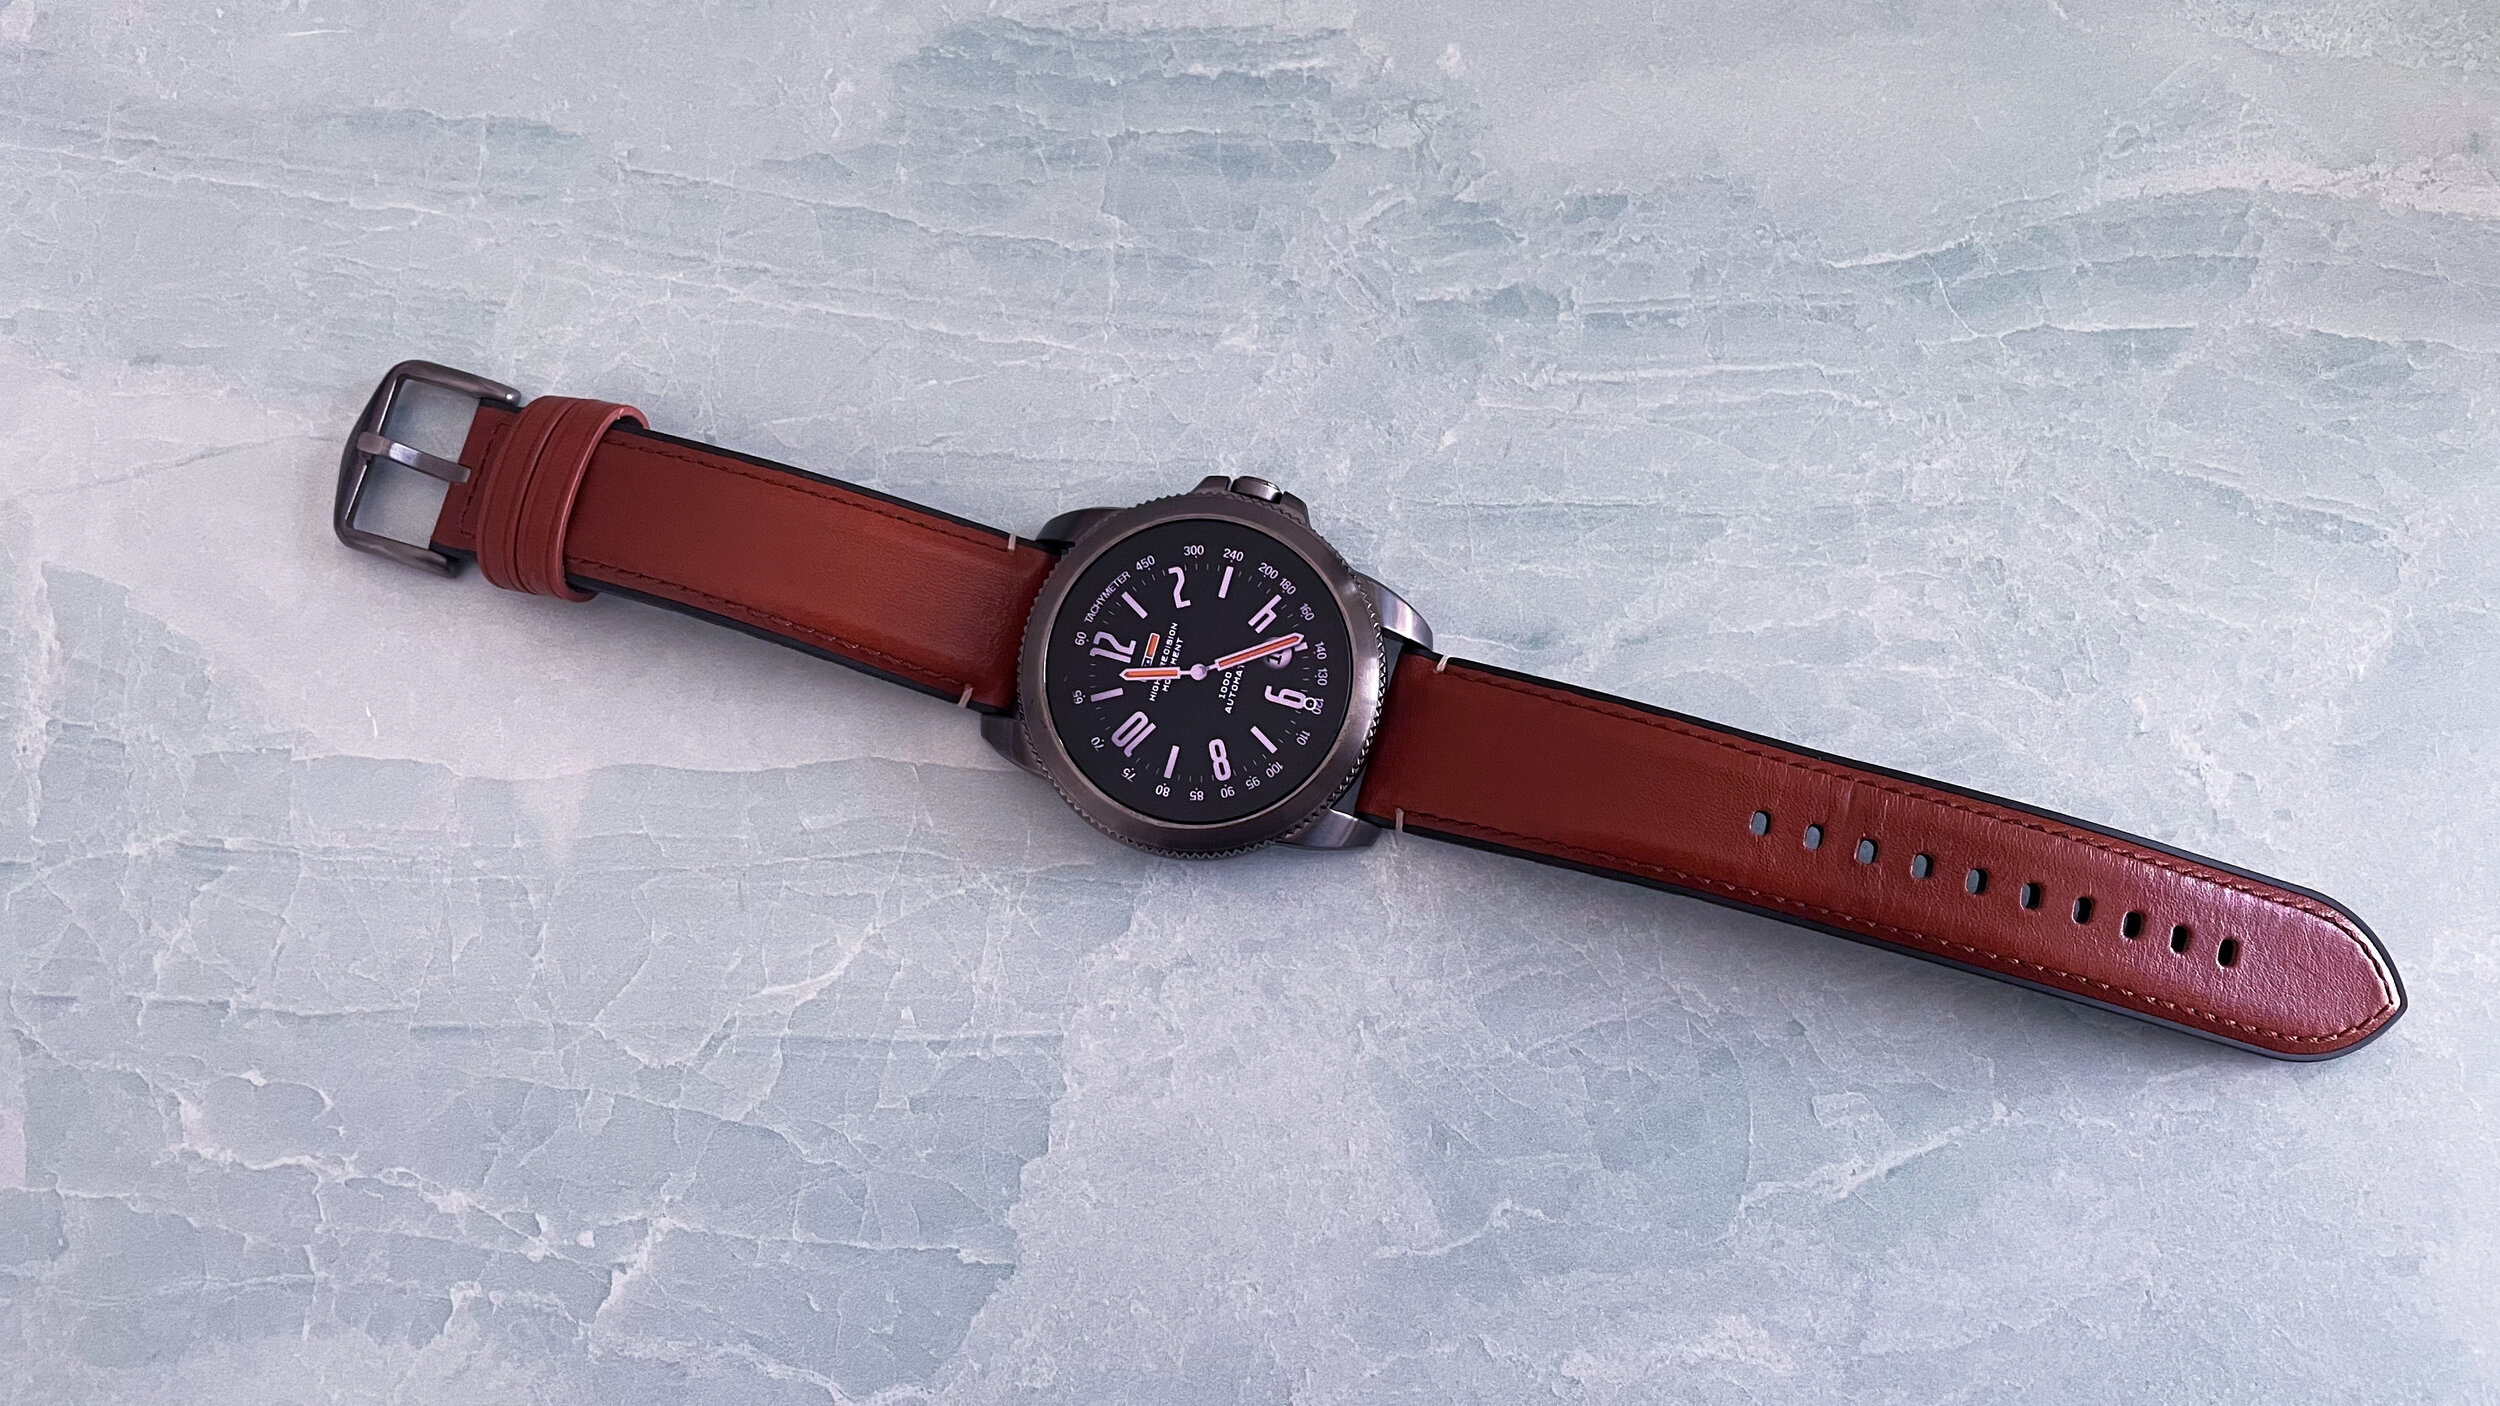 Gen 5E Smartwatches: Your Favorite Features Now In A Smaller Size - Fossil